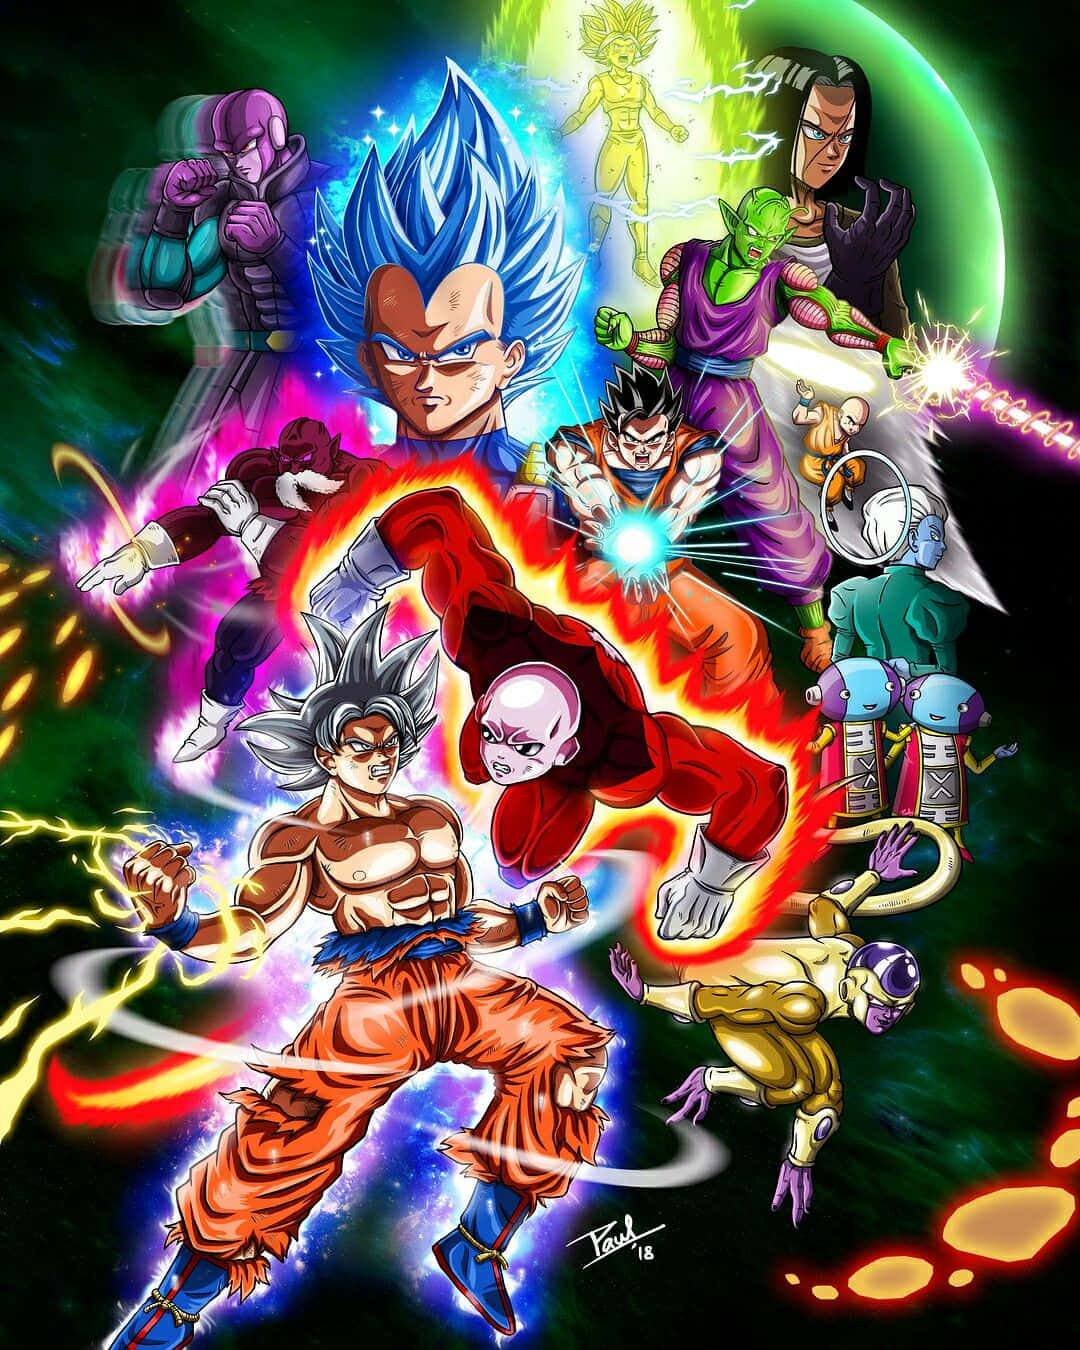 The Epic Tournament of Power Wallpaper